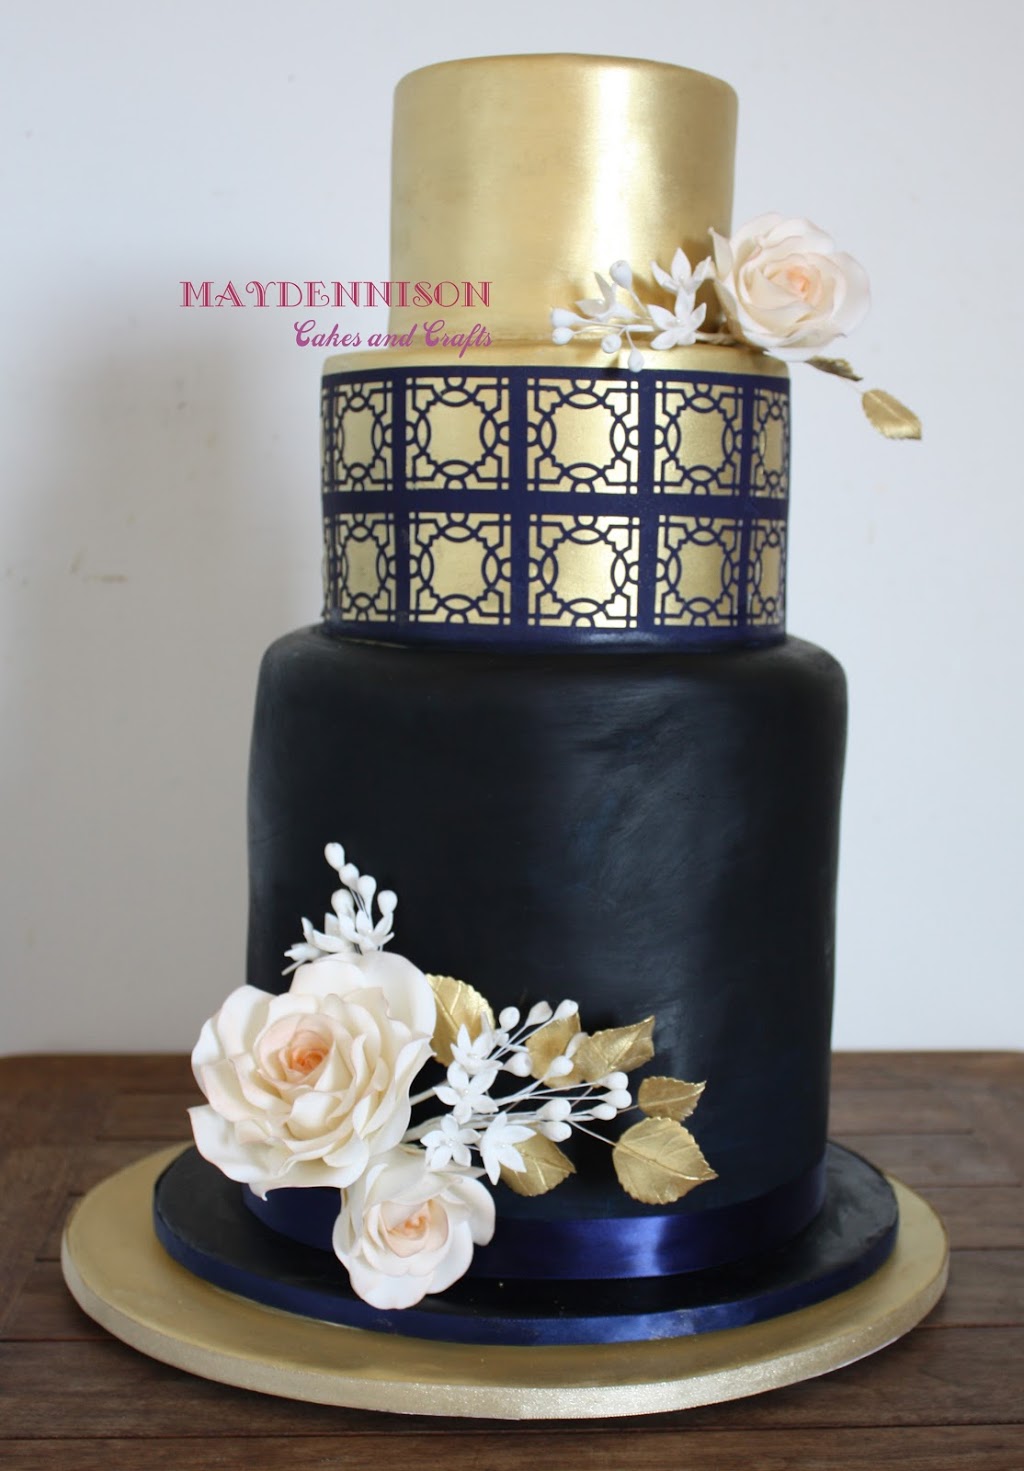 Maydennison Cakes and Crafts | bakery | 3 Dayne St, Withcott QLD 4352, Australia | 0407962933 OR +61 407 962 933